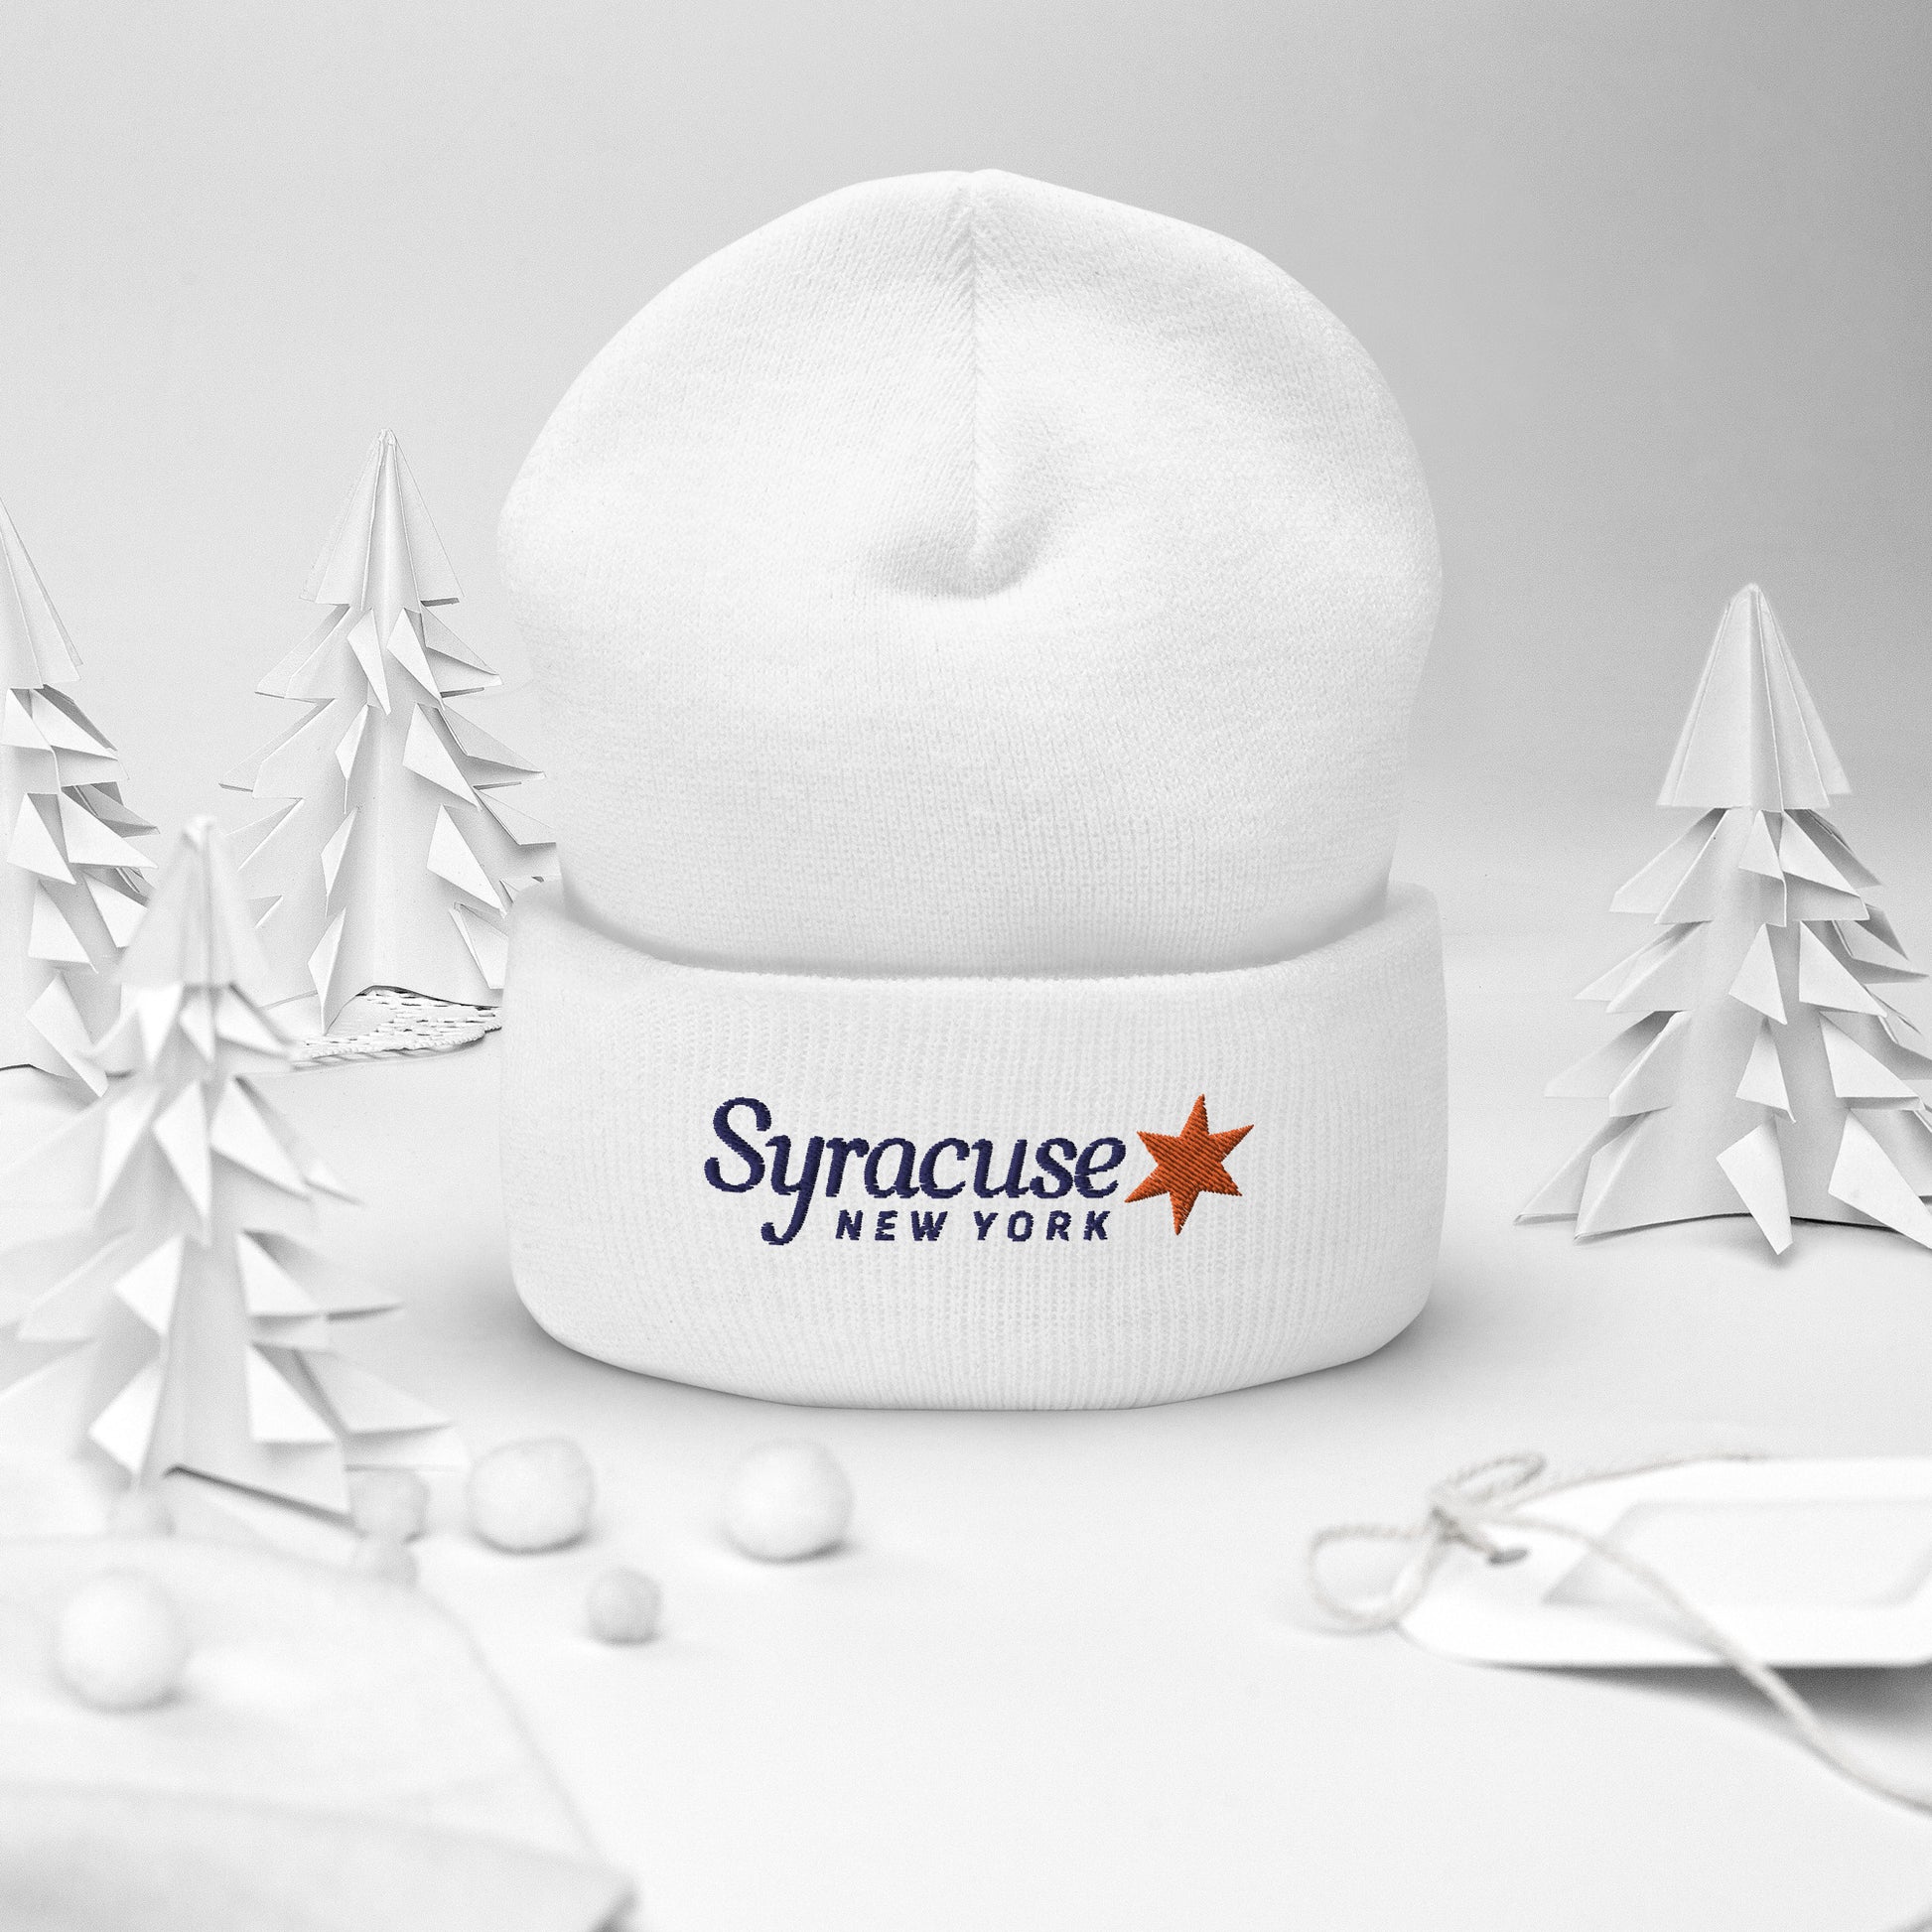 A white Syracuse, NY winter beanie hat embroidered with a Syracuse, NY logo standing upright on a decorative holiday background